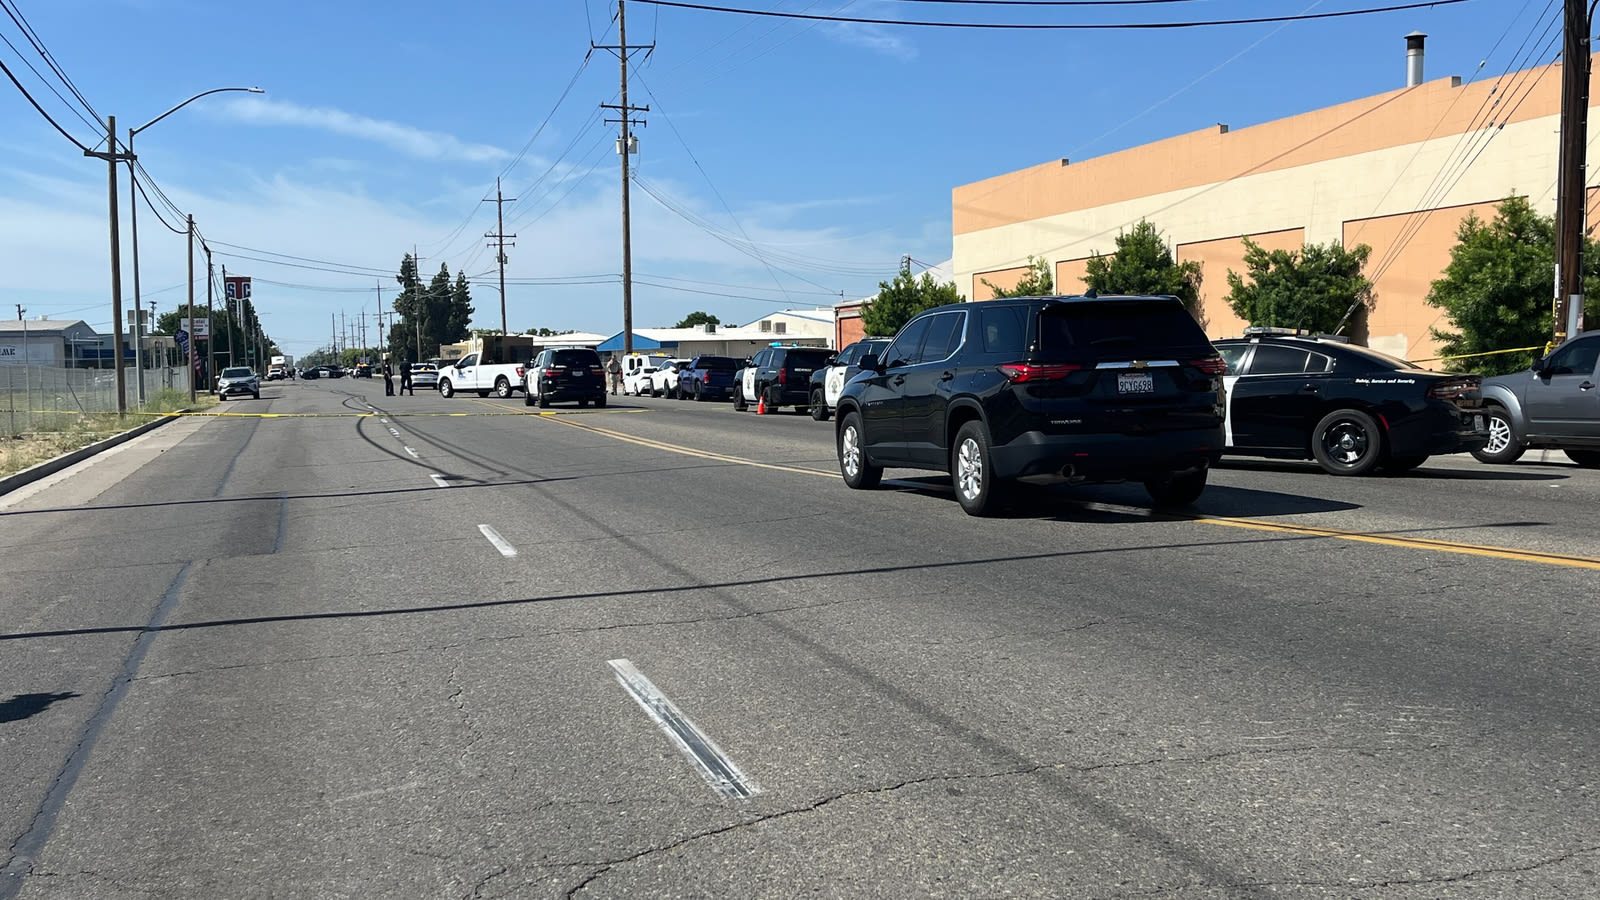 Person shot and killed by officers in southwest Fresno, police confirm